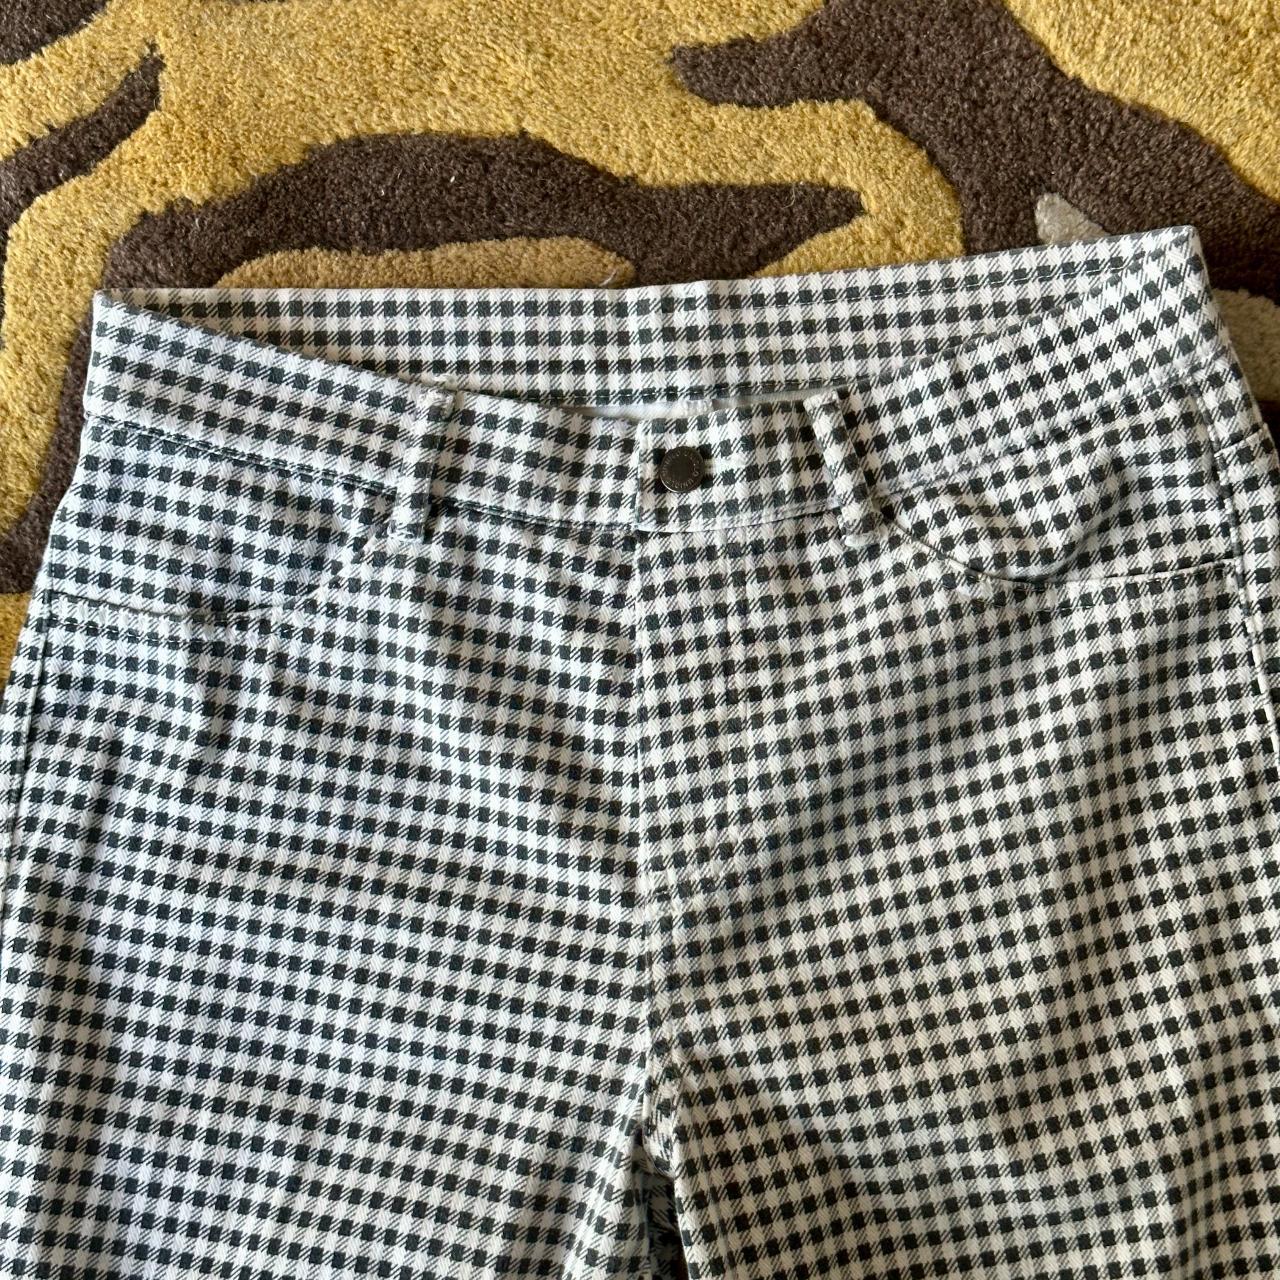 Black UNIQLO AIRism shorts NWOT, these have never - Depop